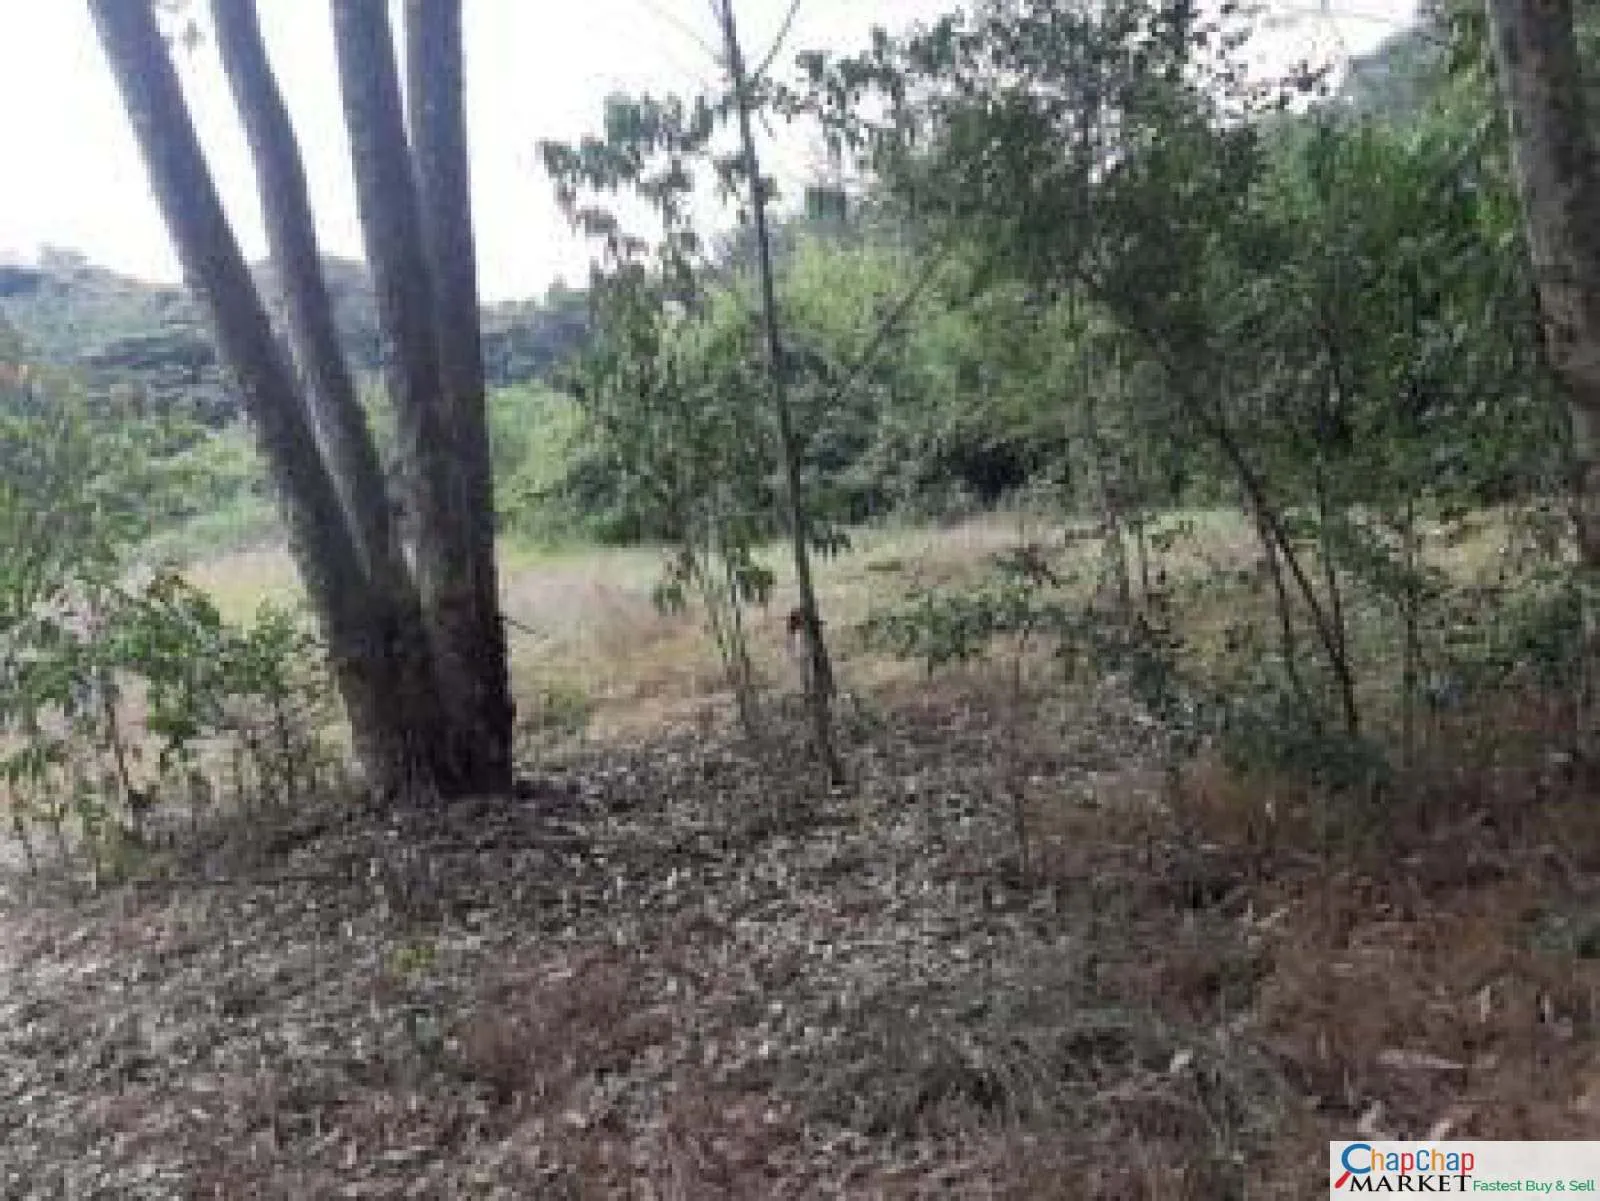 Land For Sale Real Estate-Land for sale in Karen Bomas 7 plots Half Acre each Ready Title Deed QUICK SALE 1/2 0.5 acre Exclusive 🔥